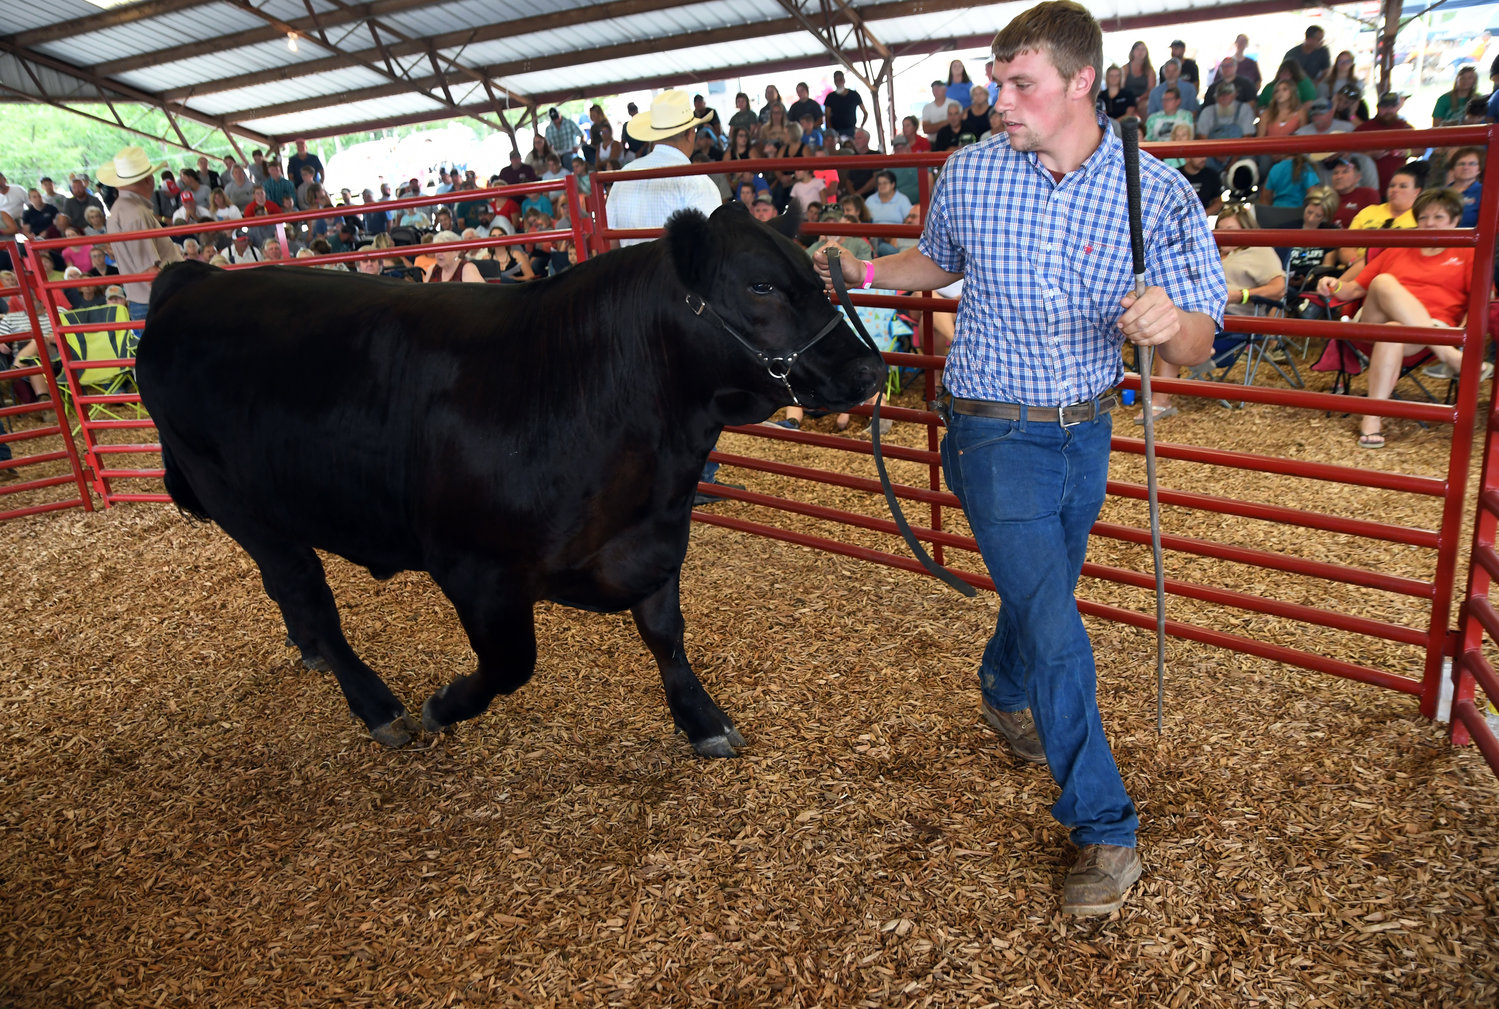 Blaine Reed of the Owensville FFA chapter participated Saturday in his final sale as an exhibitor at the Gasconade County Fair. He was one of several who were acknowledged as exhibitors in their final sale.